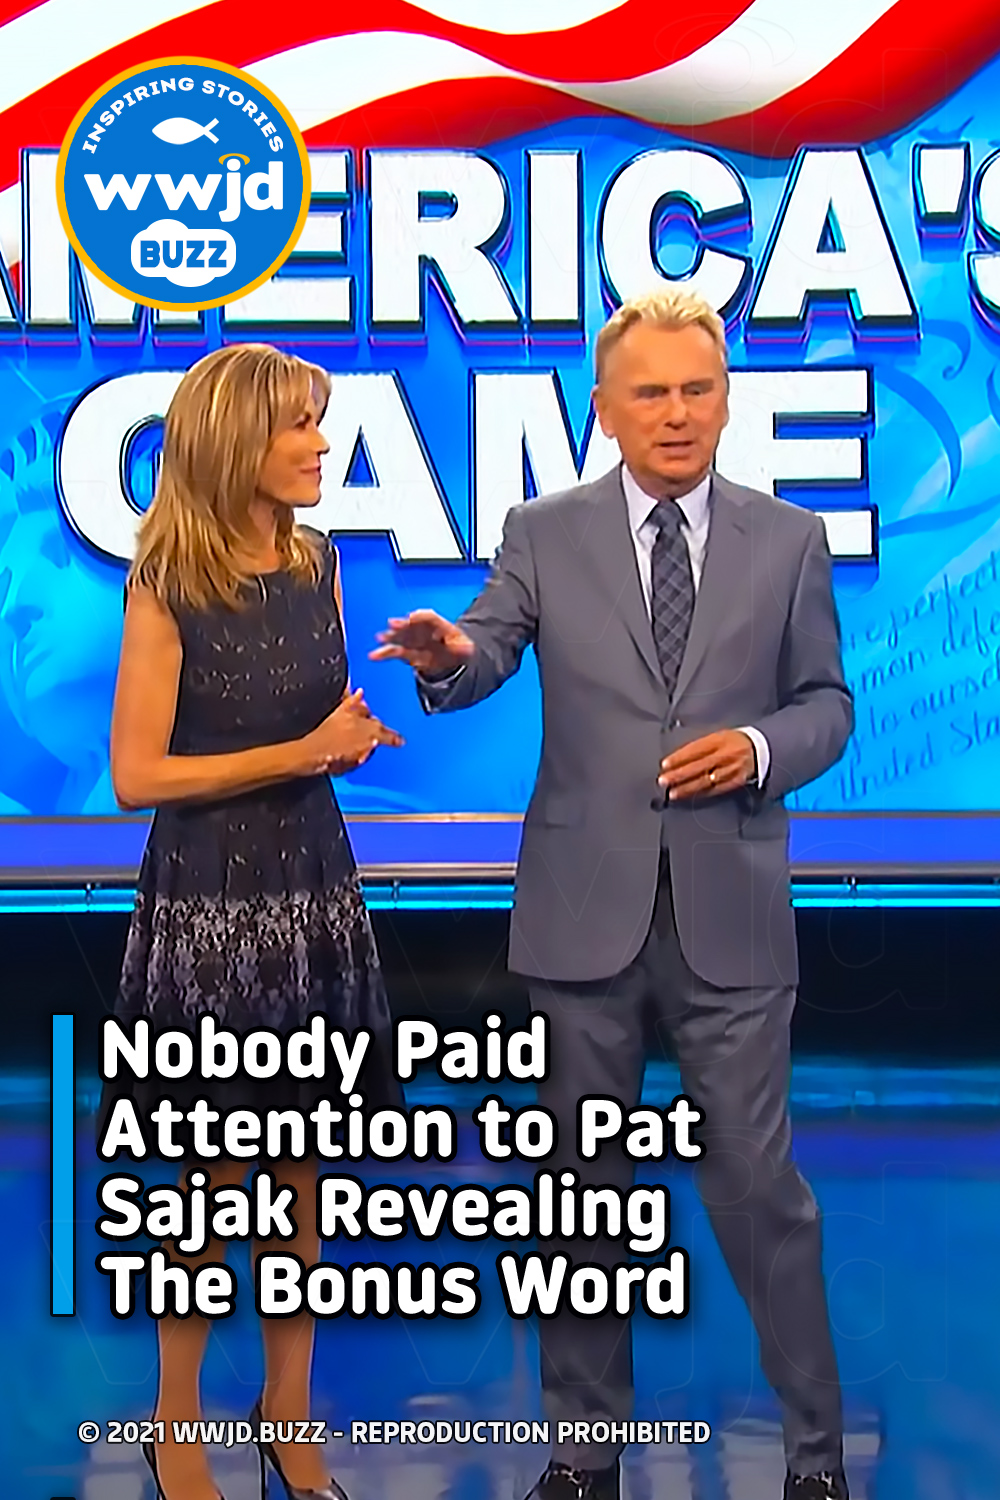 Nobody Paid Attention to Pat Sajak Revealing The Bonus Word